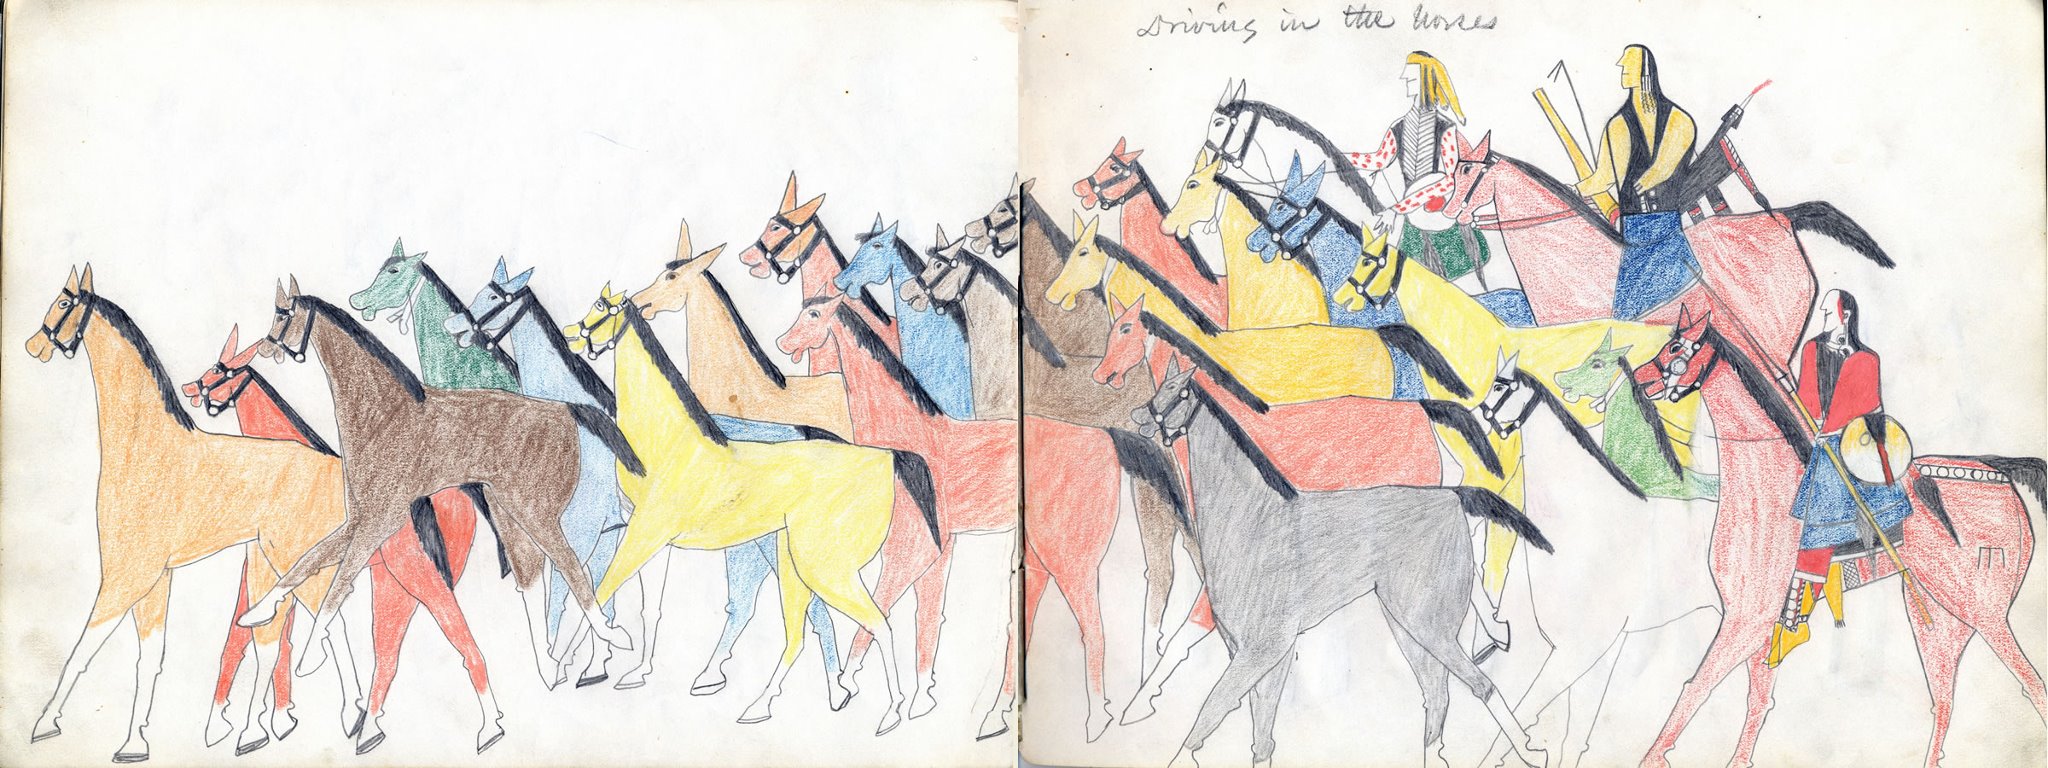 Special Collections & Archives’ Ledger Art Books Serve as Hands-On ...